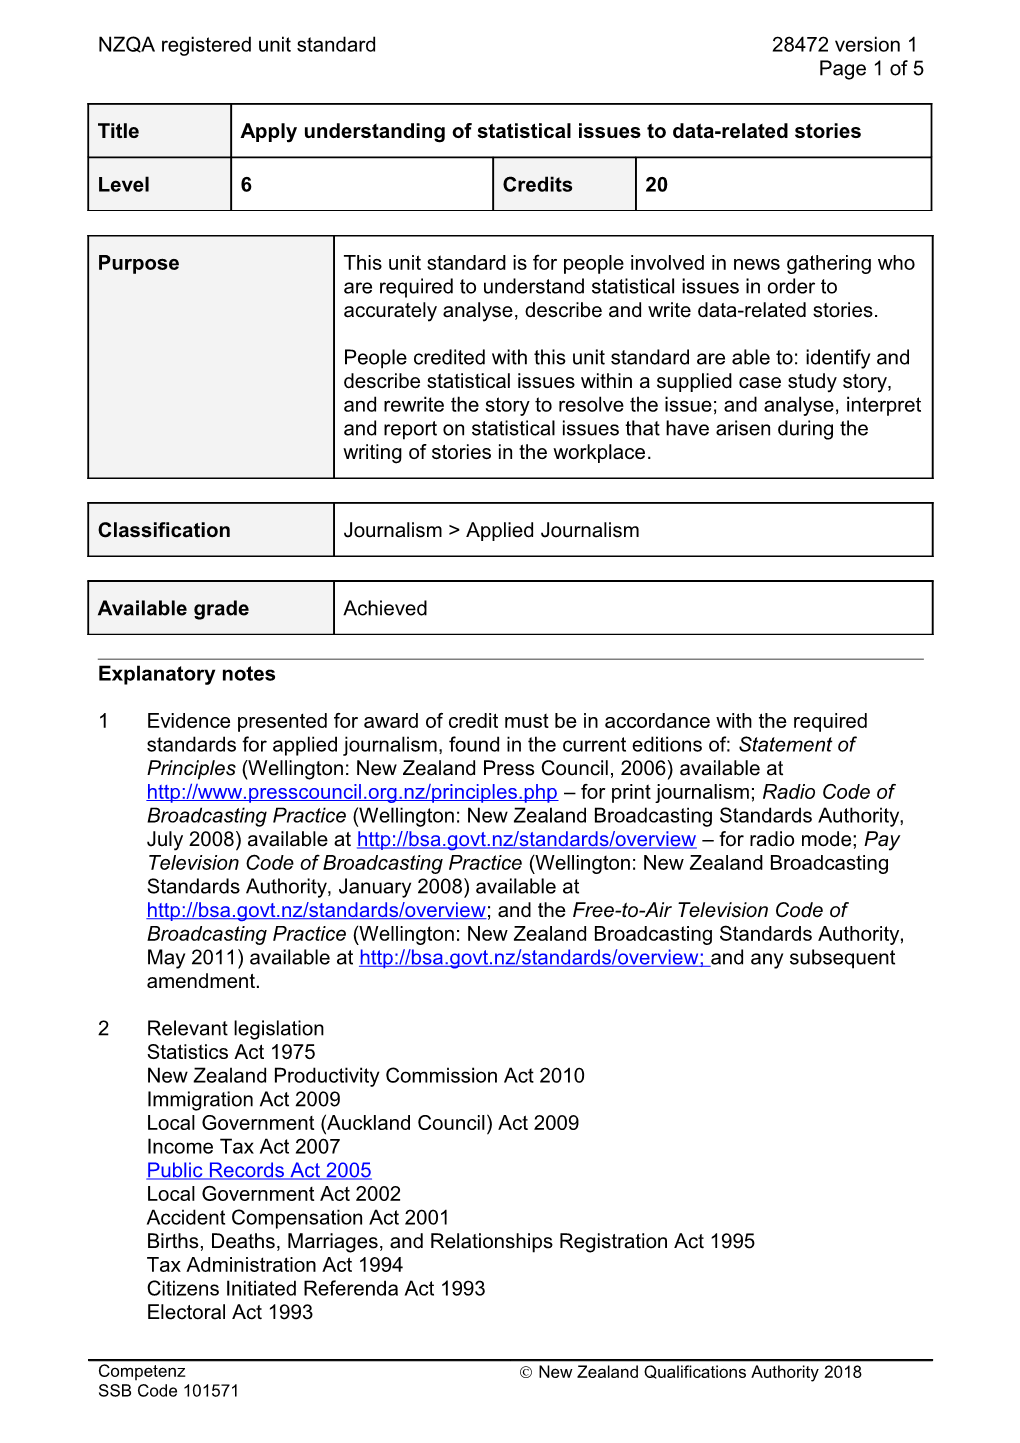 28472 Apply Understanding of Statistical Issues to Data-Related Stories